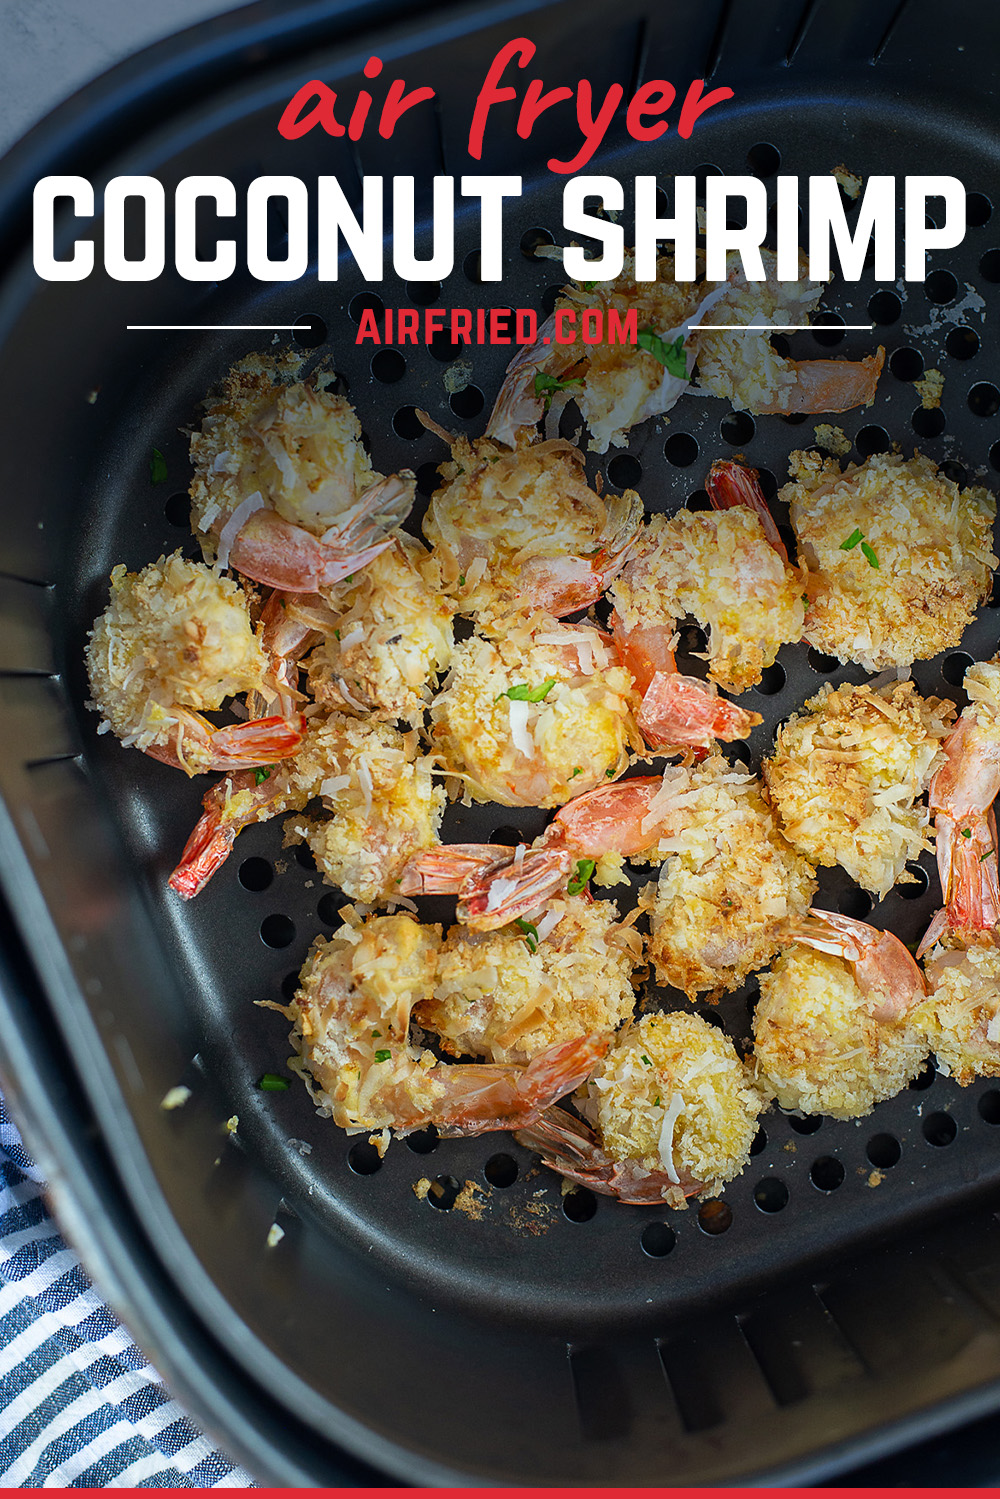 You can make this air fryer coconut shrimp in about 10 minutes!  The result is a crispy shrimp ready for dipping in your favorite cocktail sauce.